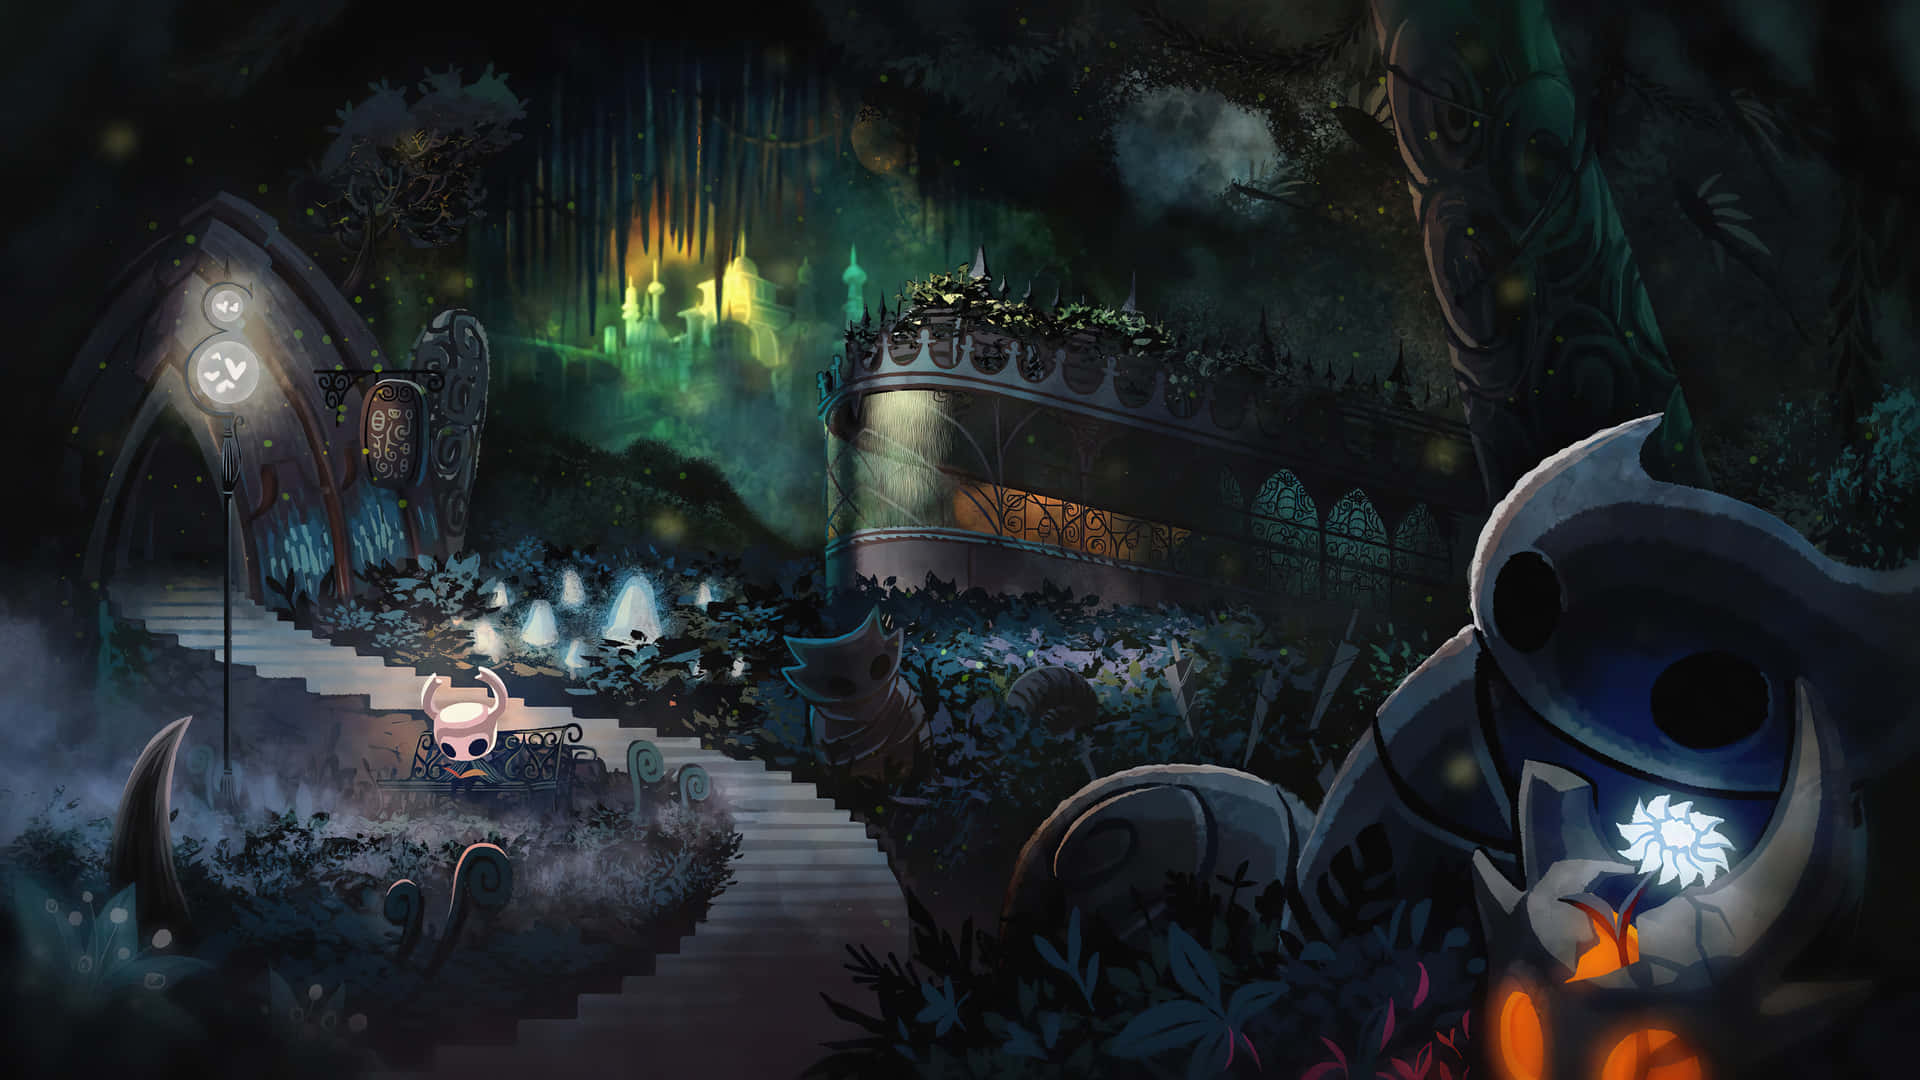 “Take flight in Hollow Knight and explore the depths of a forgotten kingdom.”